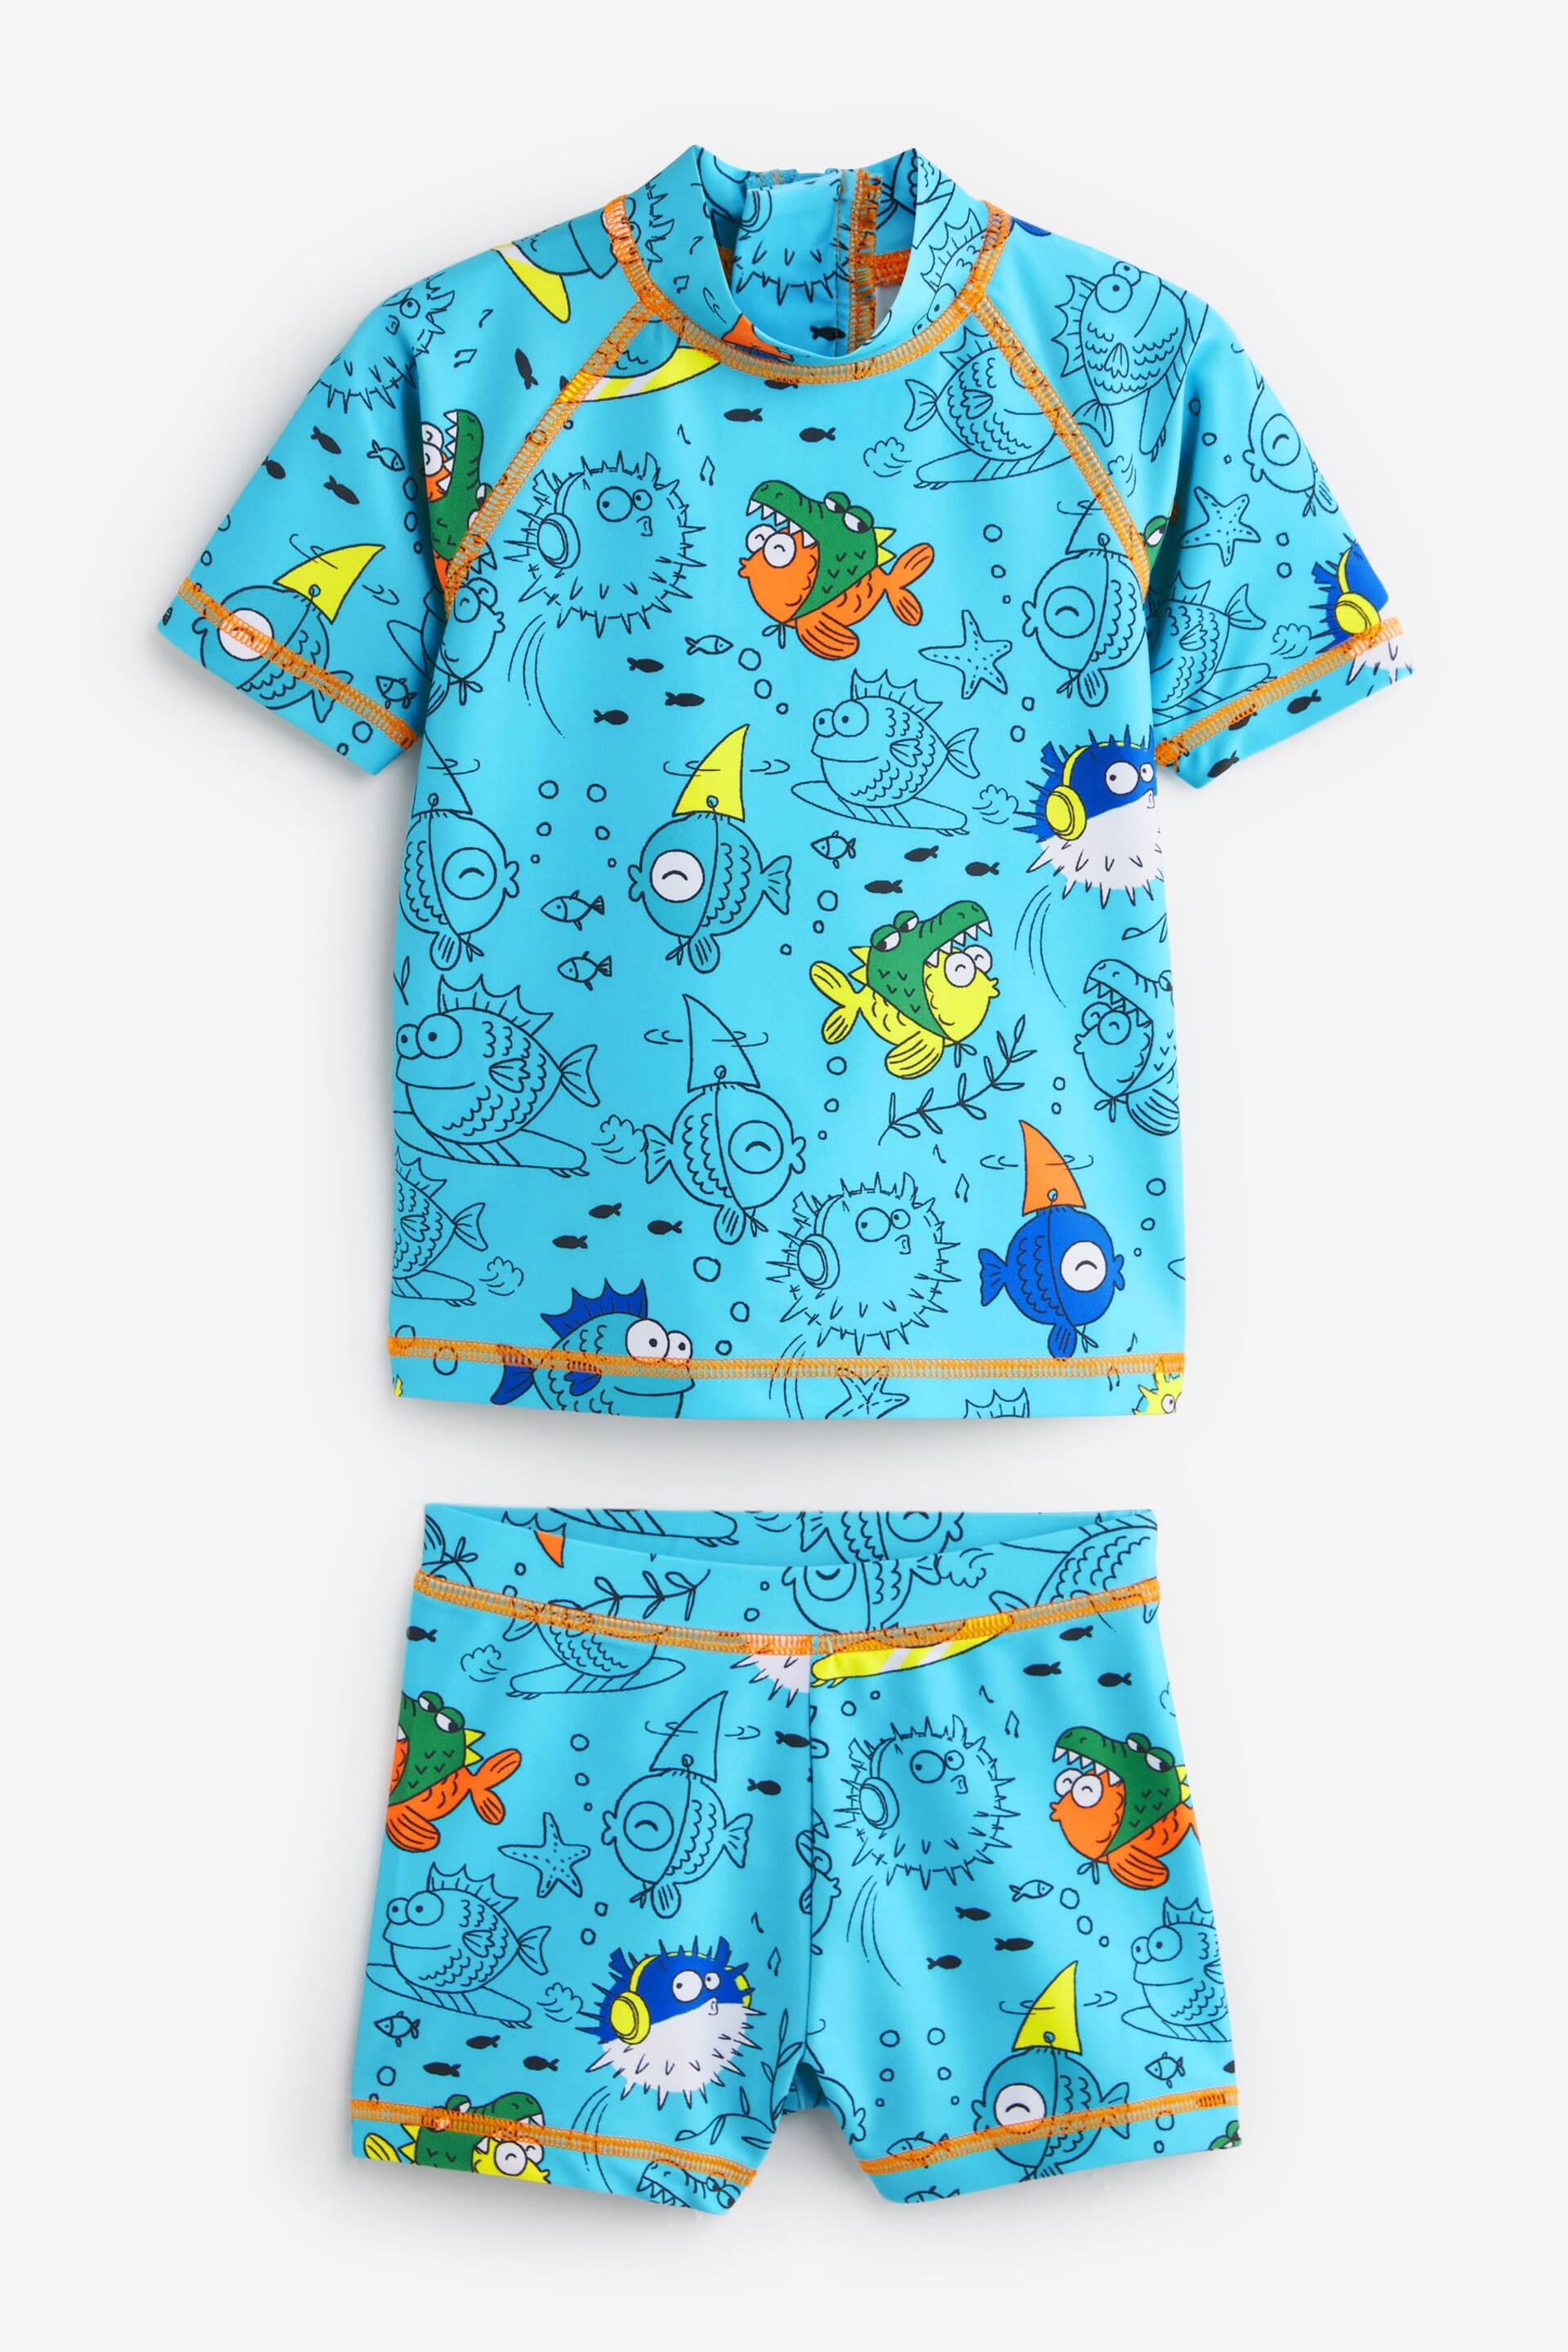 Blue Puffer Fish Sunsafe Top and Shorts Set (3mths-7yrs) - Image 5 of 8